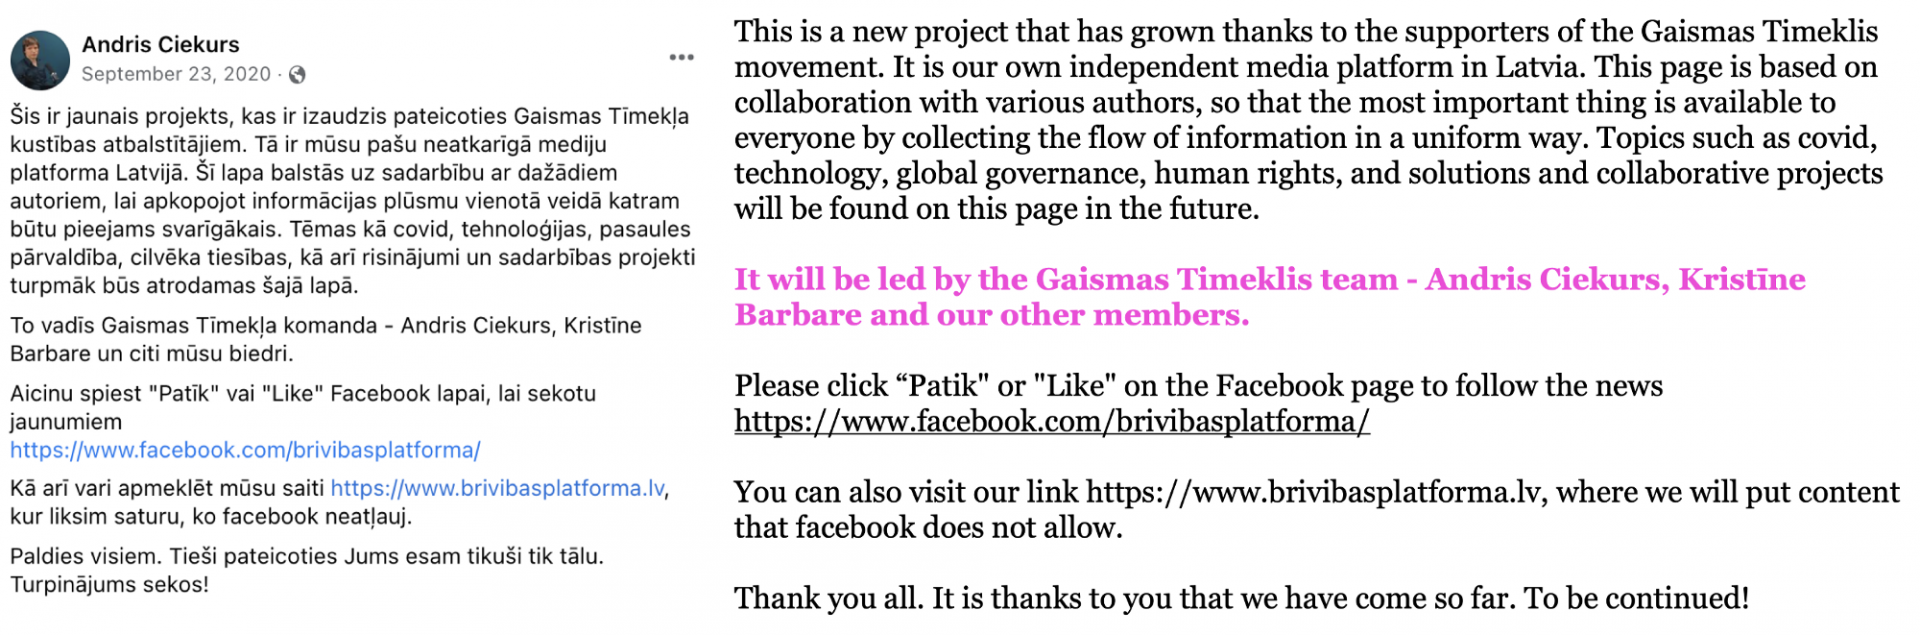 A screengrab of a Facebook post in which Andris Ciekurs discussed the launch of Brivibas Platforma, including highlighting himself and Barbare (pink text) as leading the page.